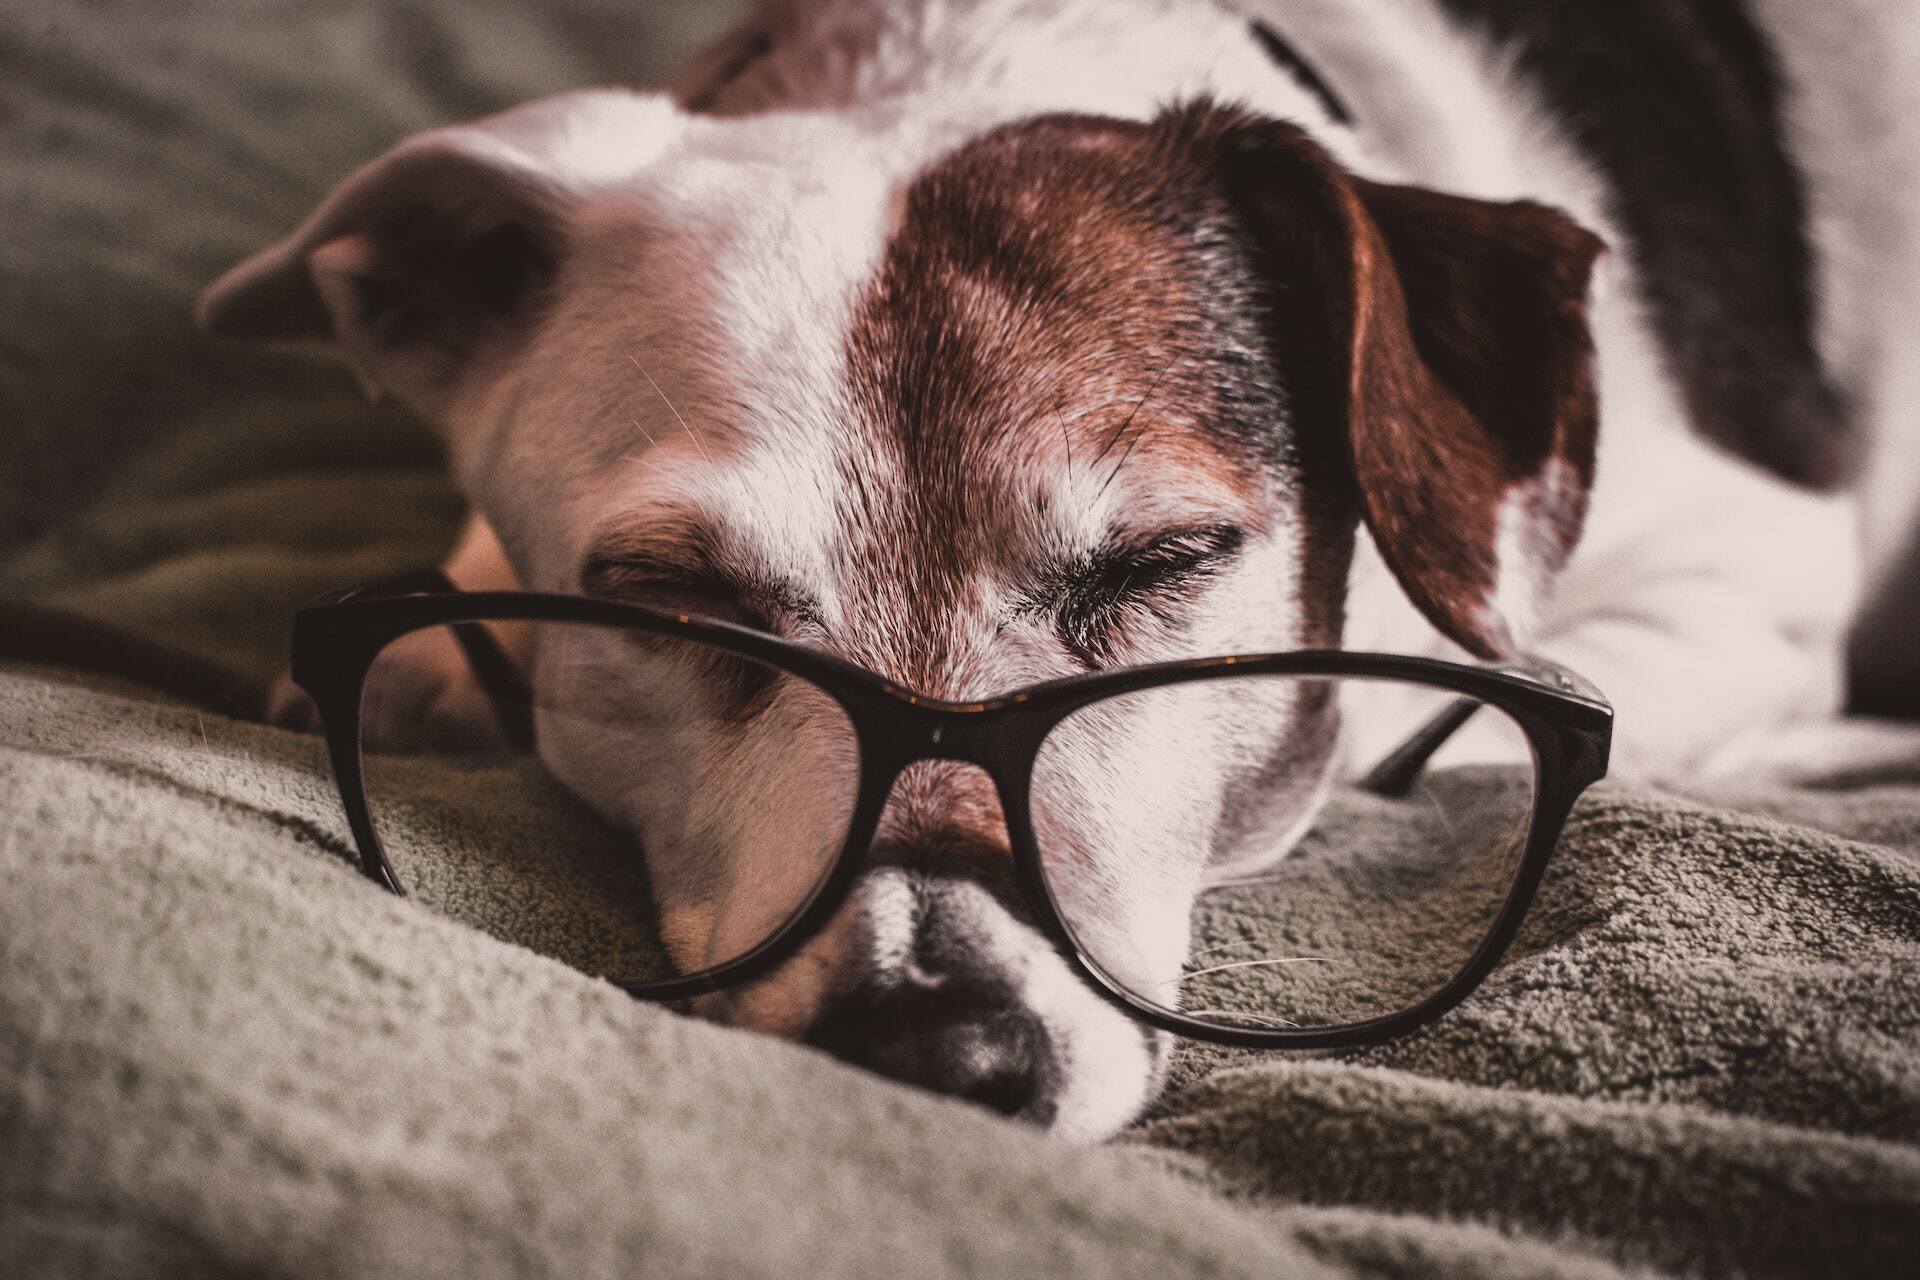 A dog sleeping on a blanket while wearing a pair of eyeglasses